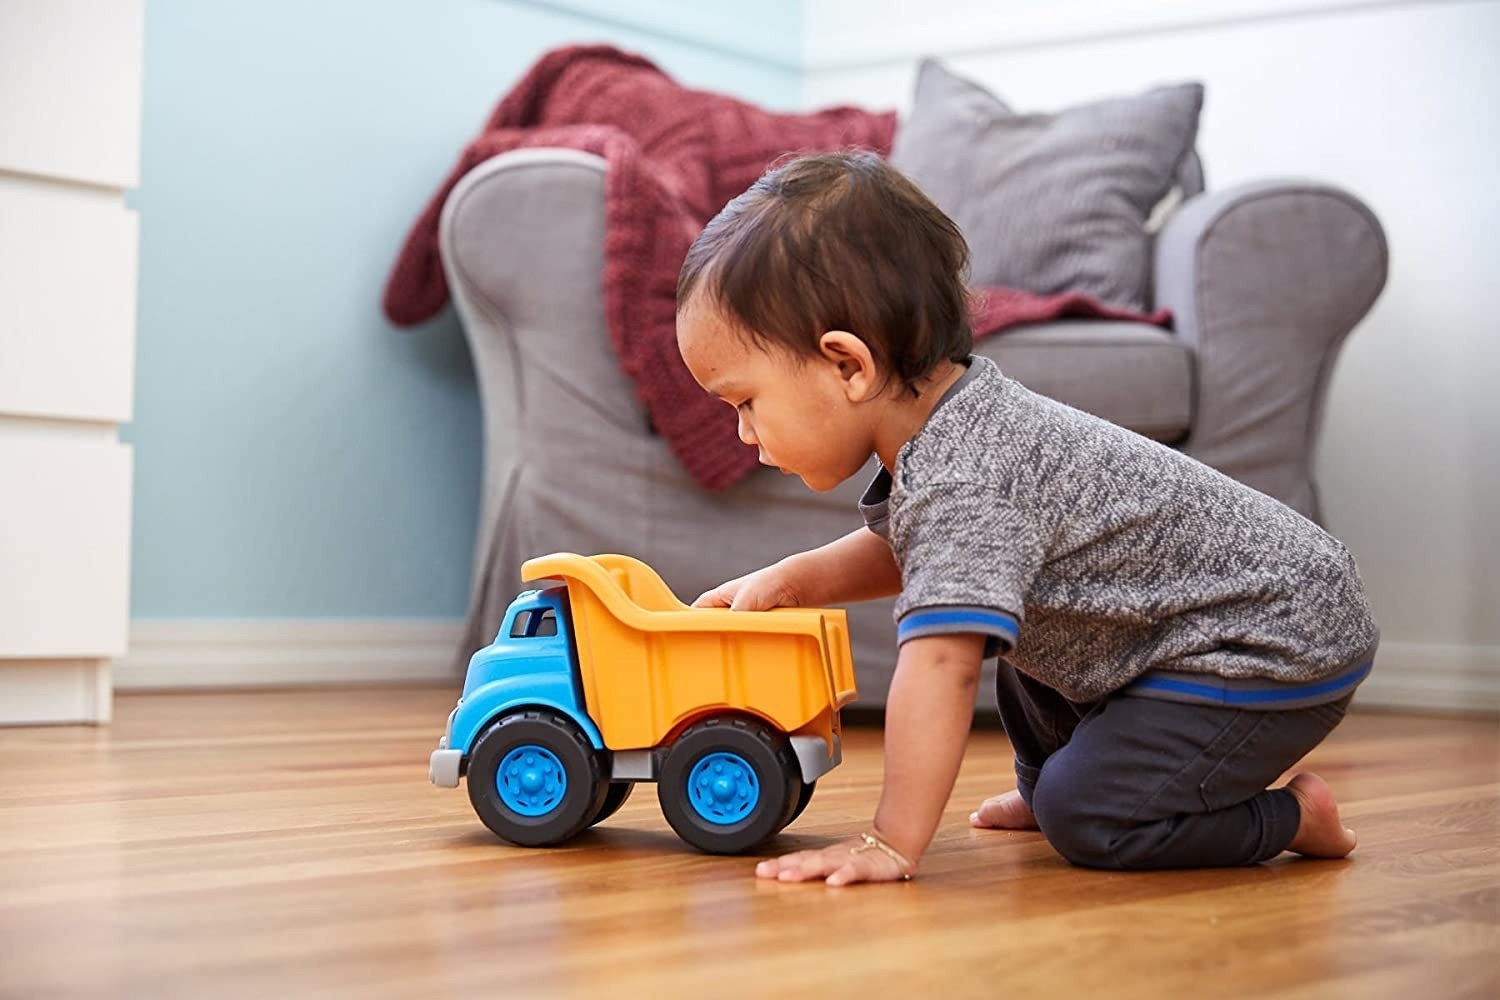 Child plays with a toy dump truck